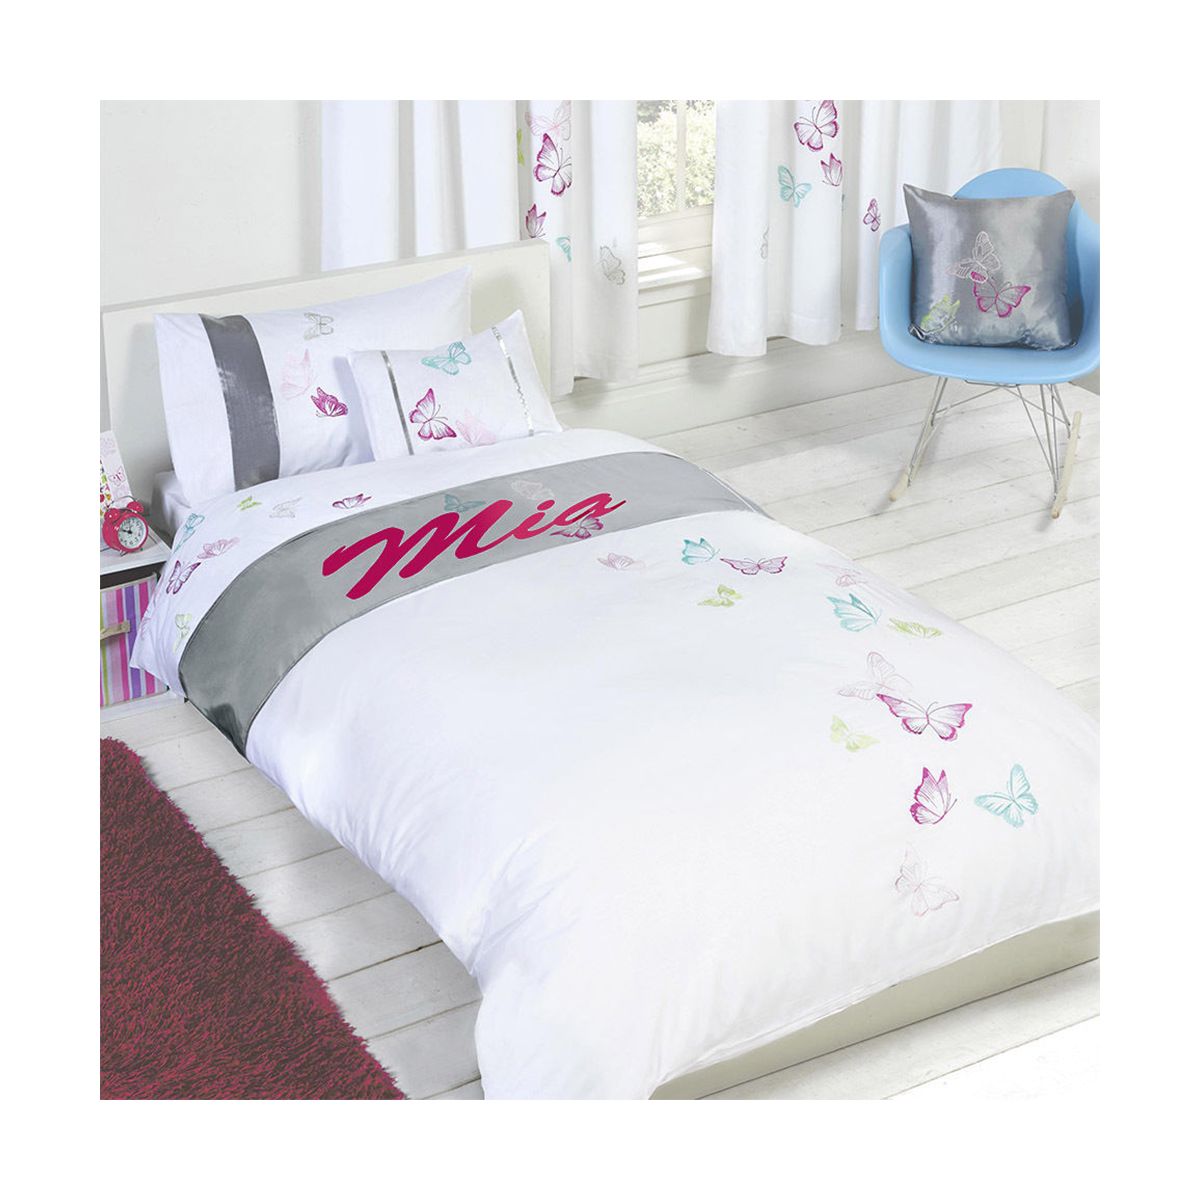 Mia - Personalised Butterfly Duvet Cover Set